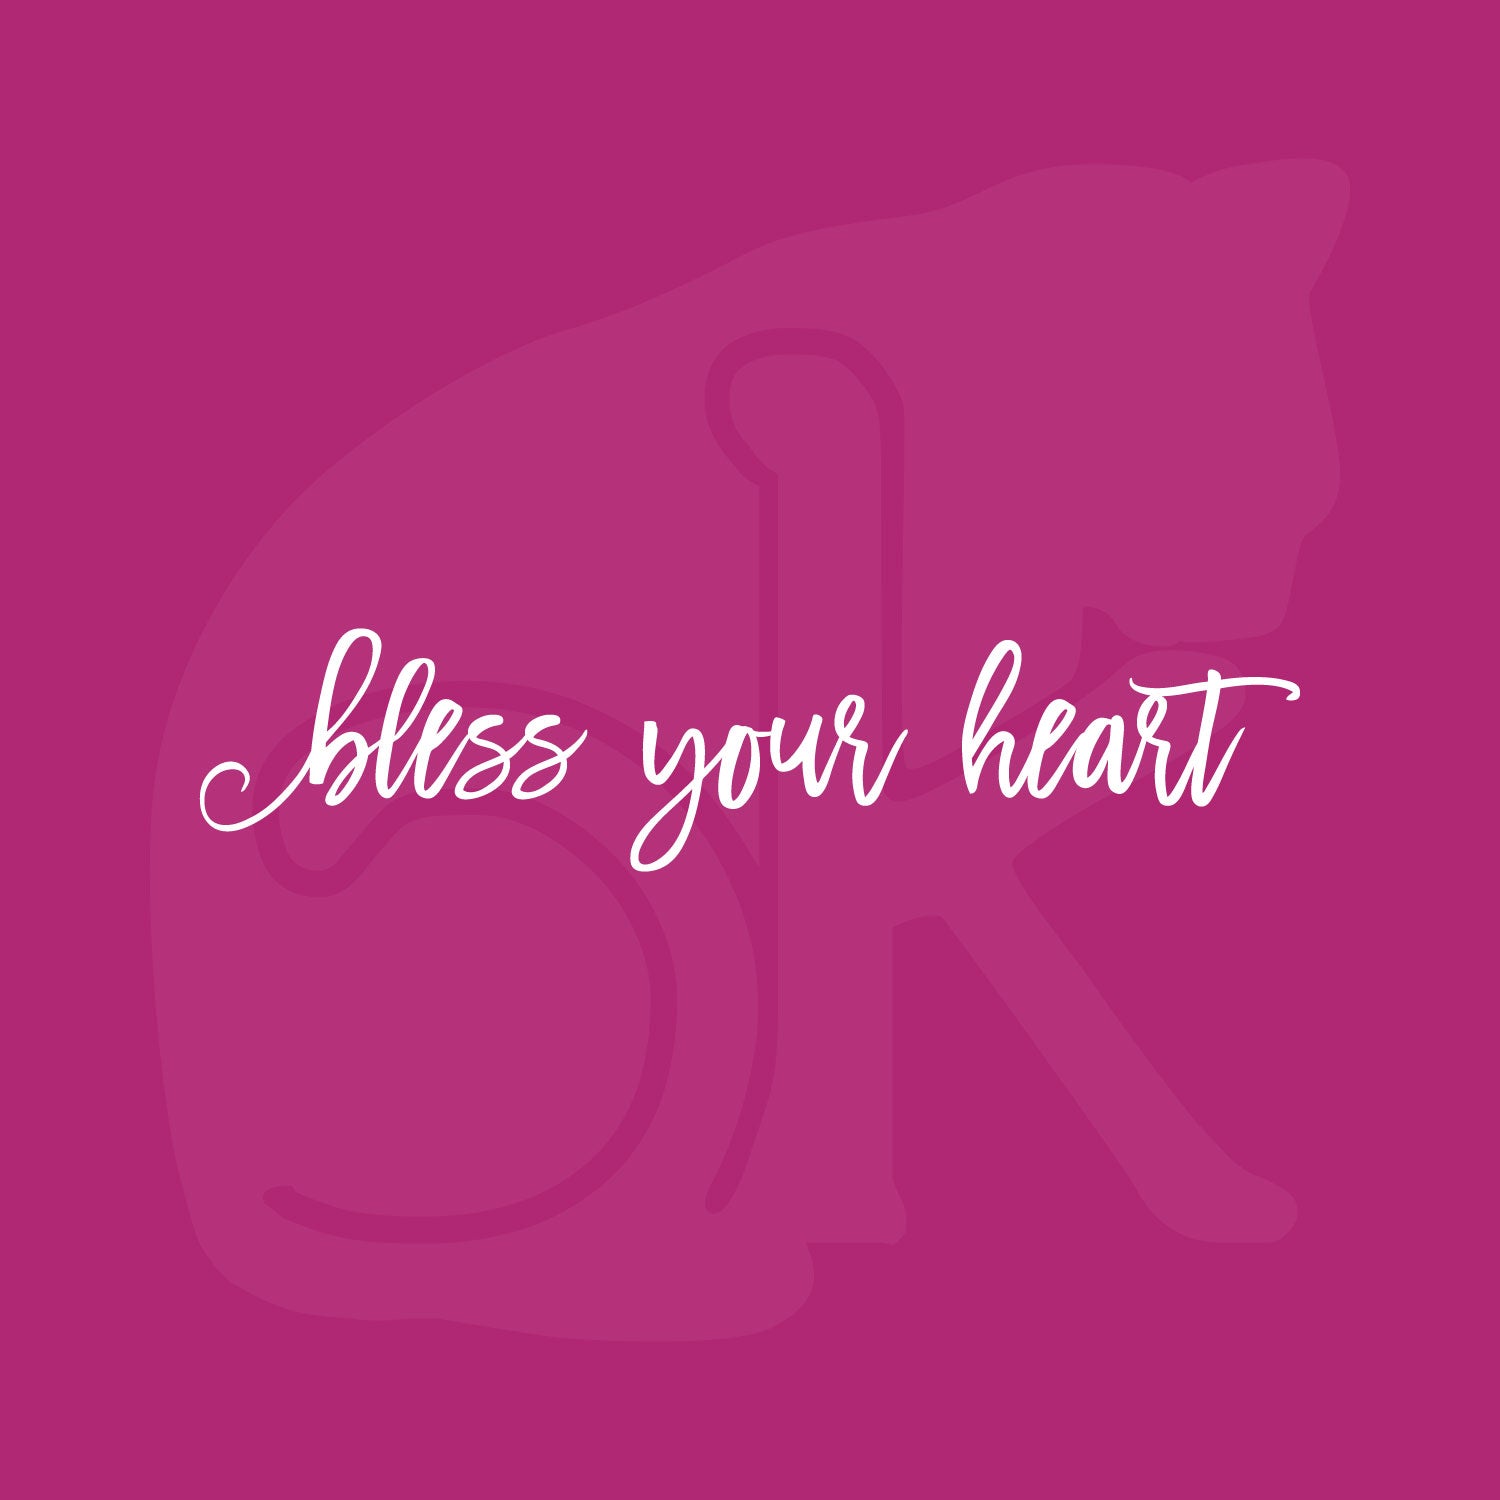 Standalone watermarked graphic in an overly twee font: "bless your heart"